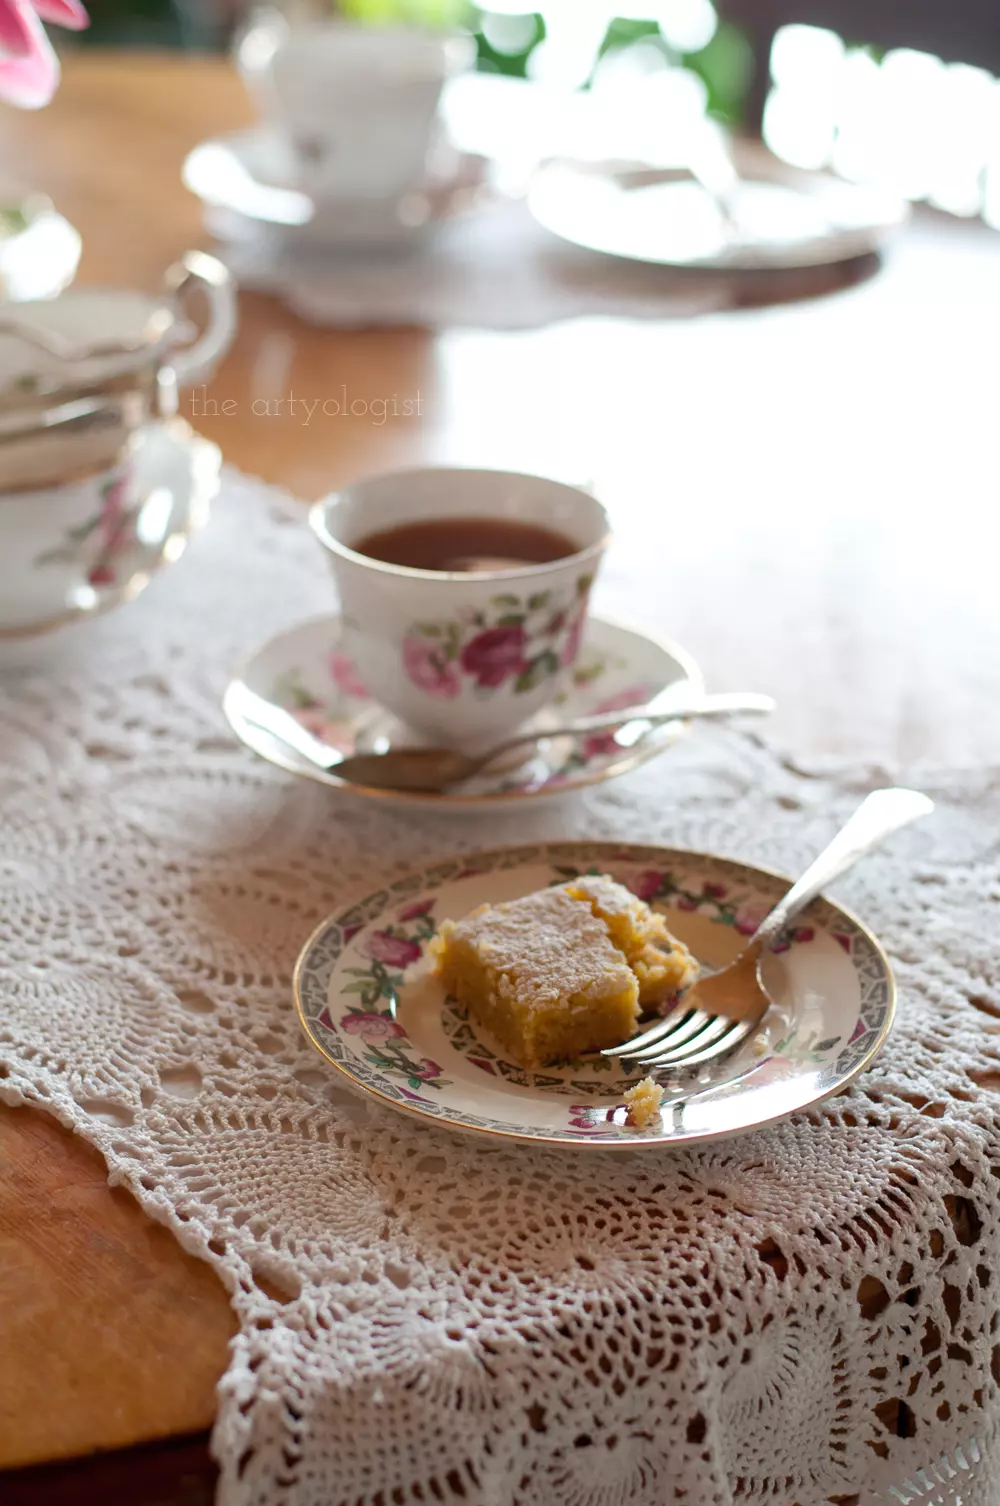 A small plate with a lemon square on it and a cup of tea in the background